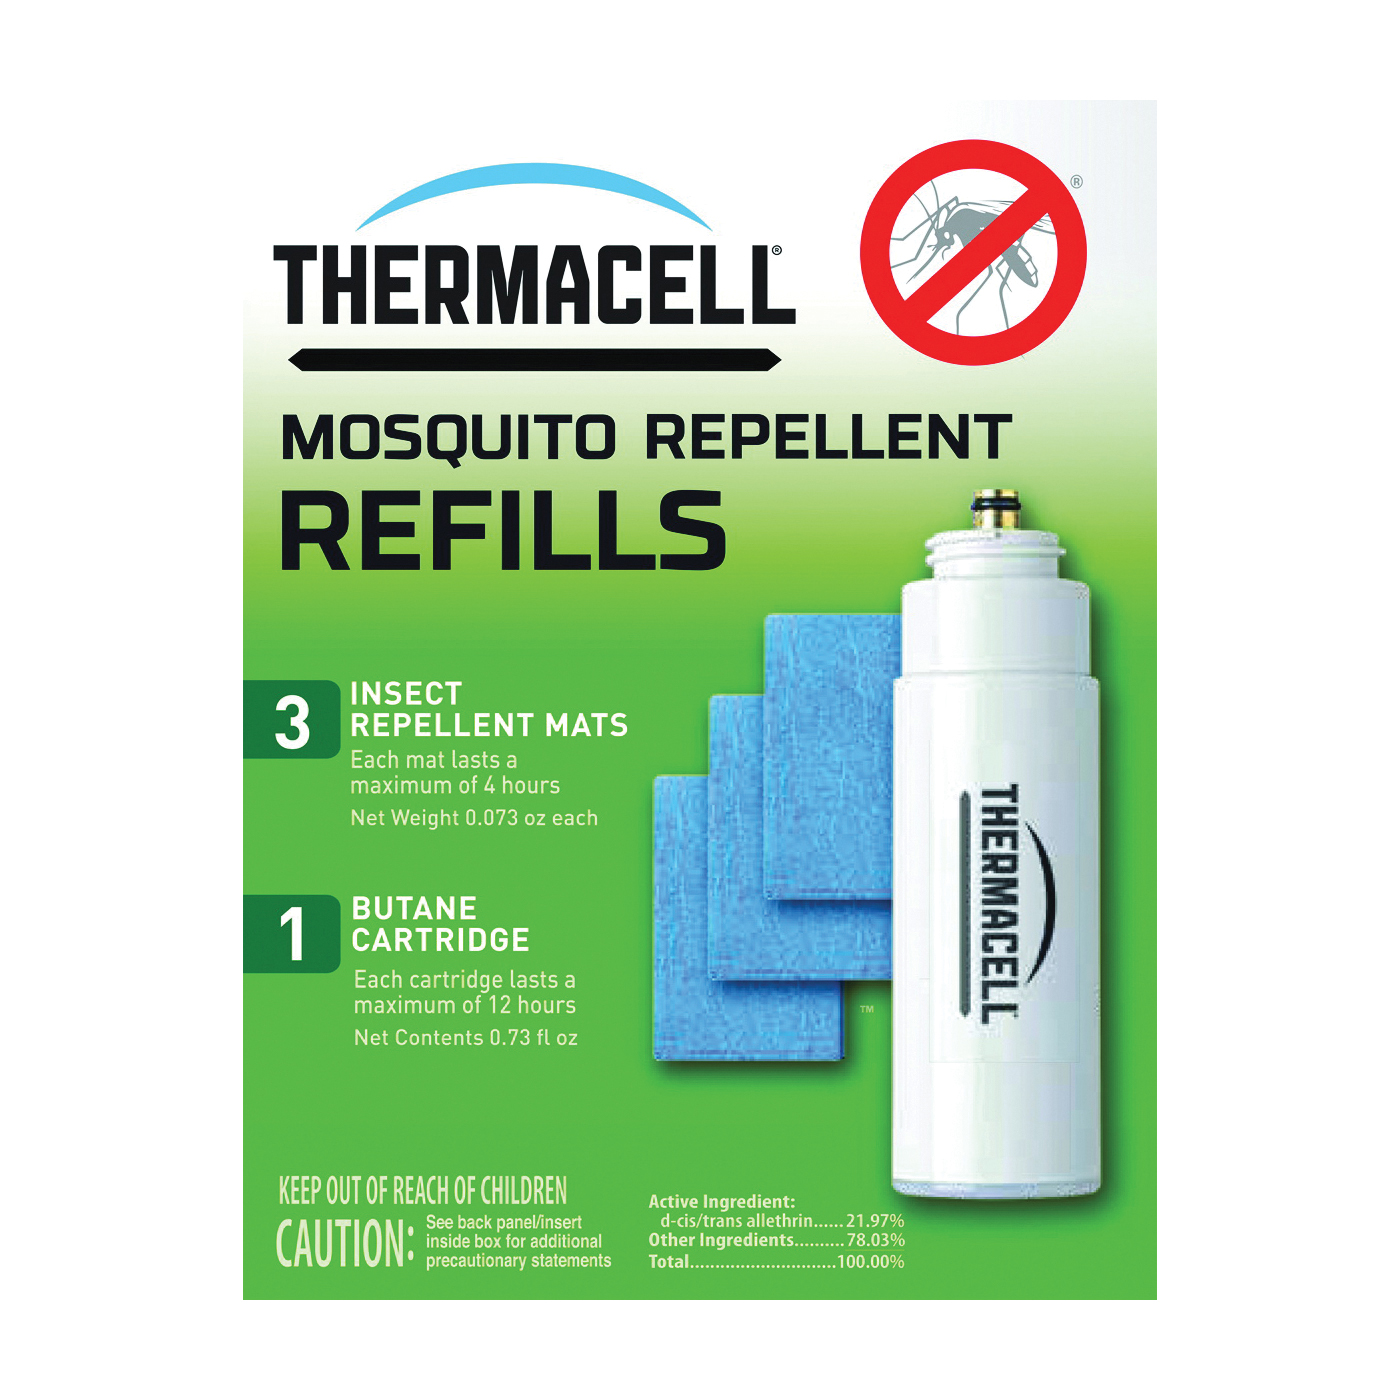 Thermacell MR000-12 Repellent Refill - 1